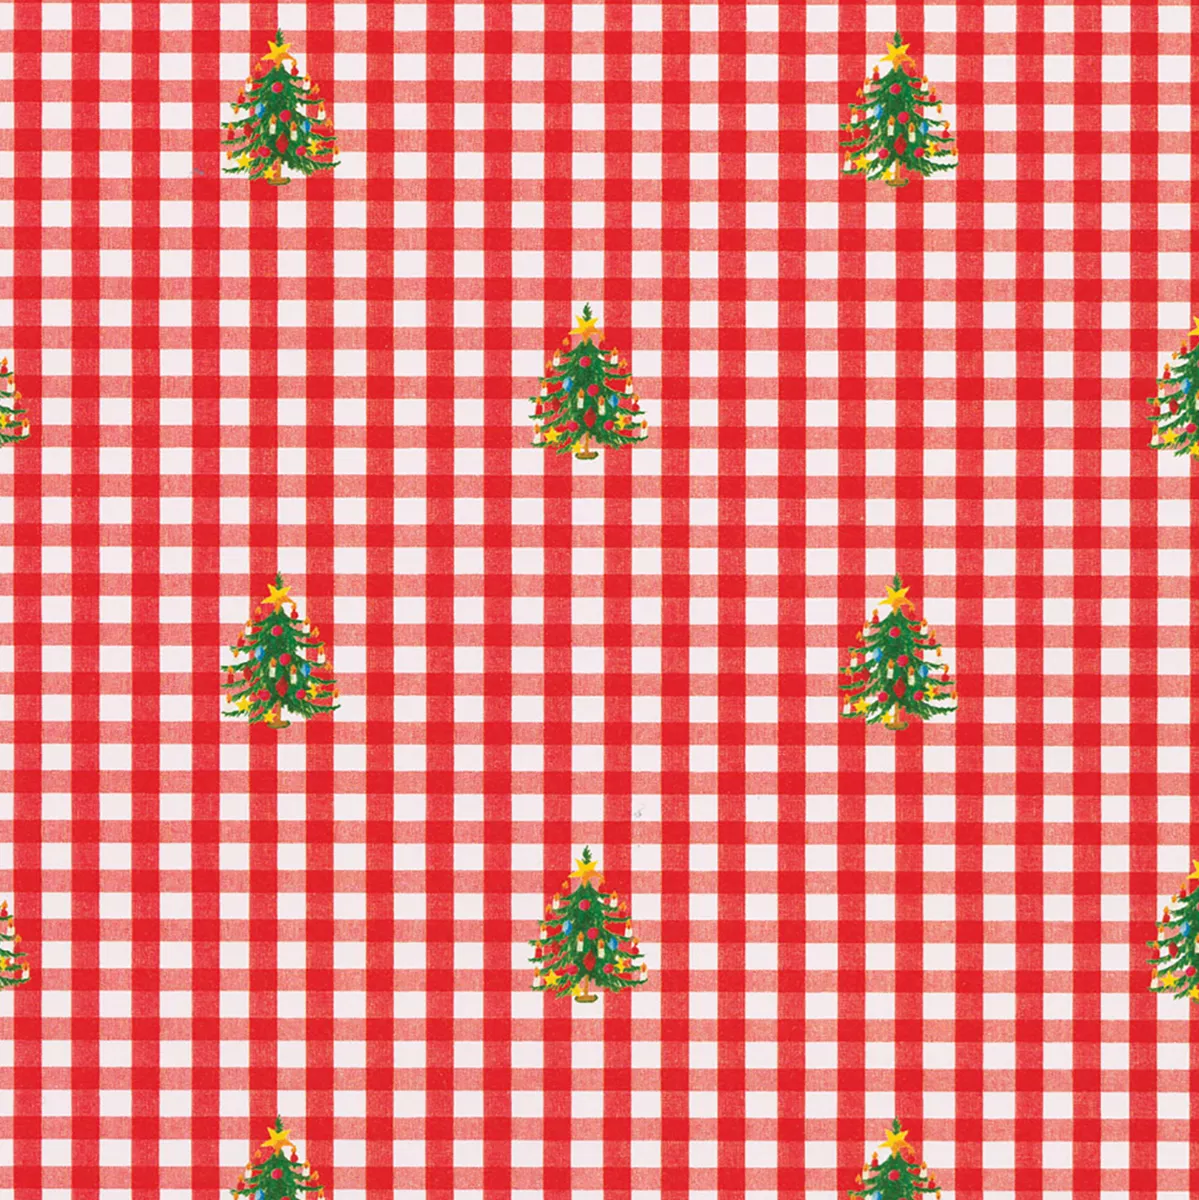 Wrapping Paper: Oh Christmas Tree Pink gift Wrap, Birthday